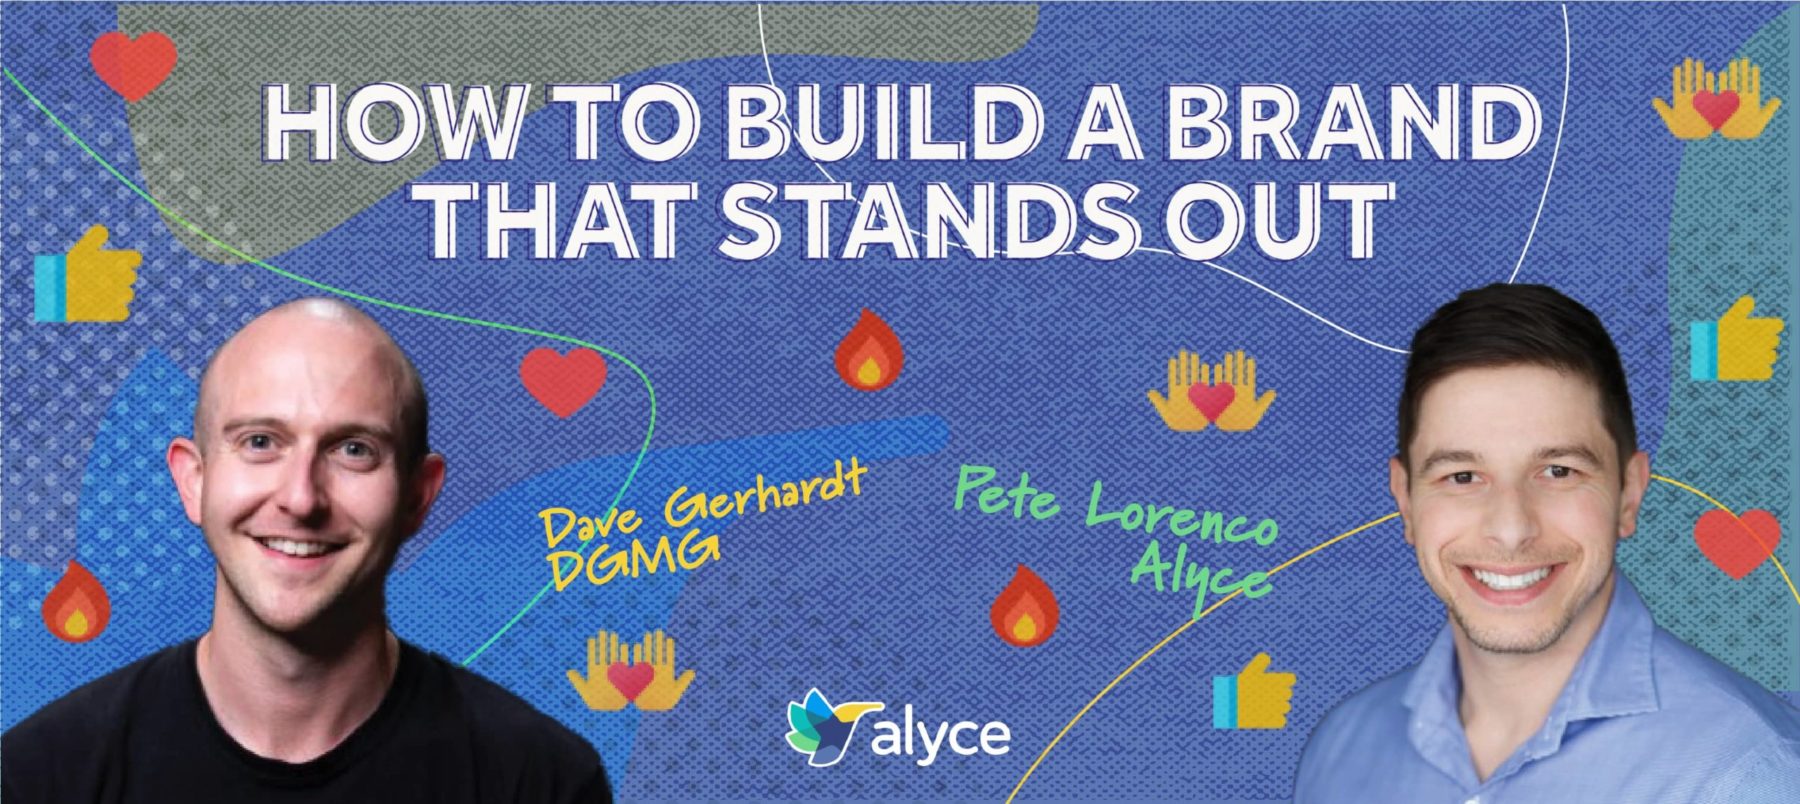 How to Build a Brand That Stands Out - Fireside Chat